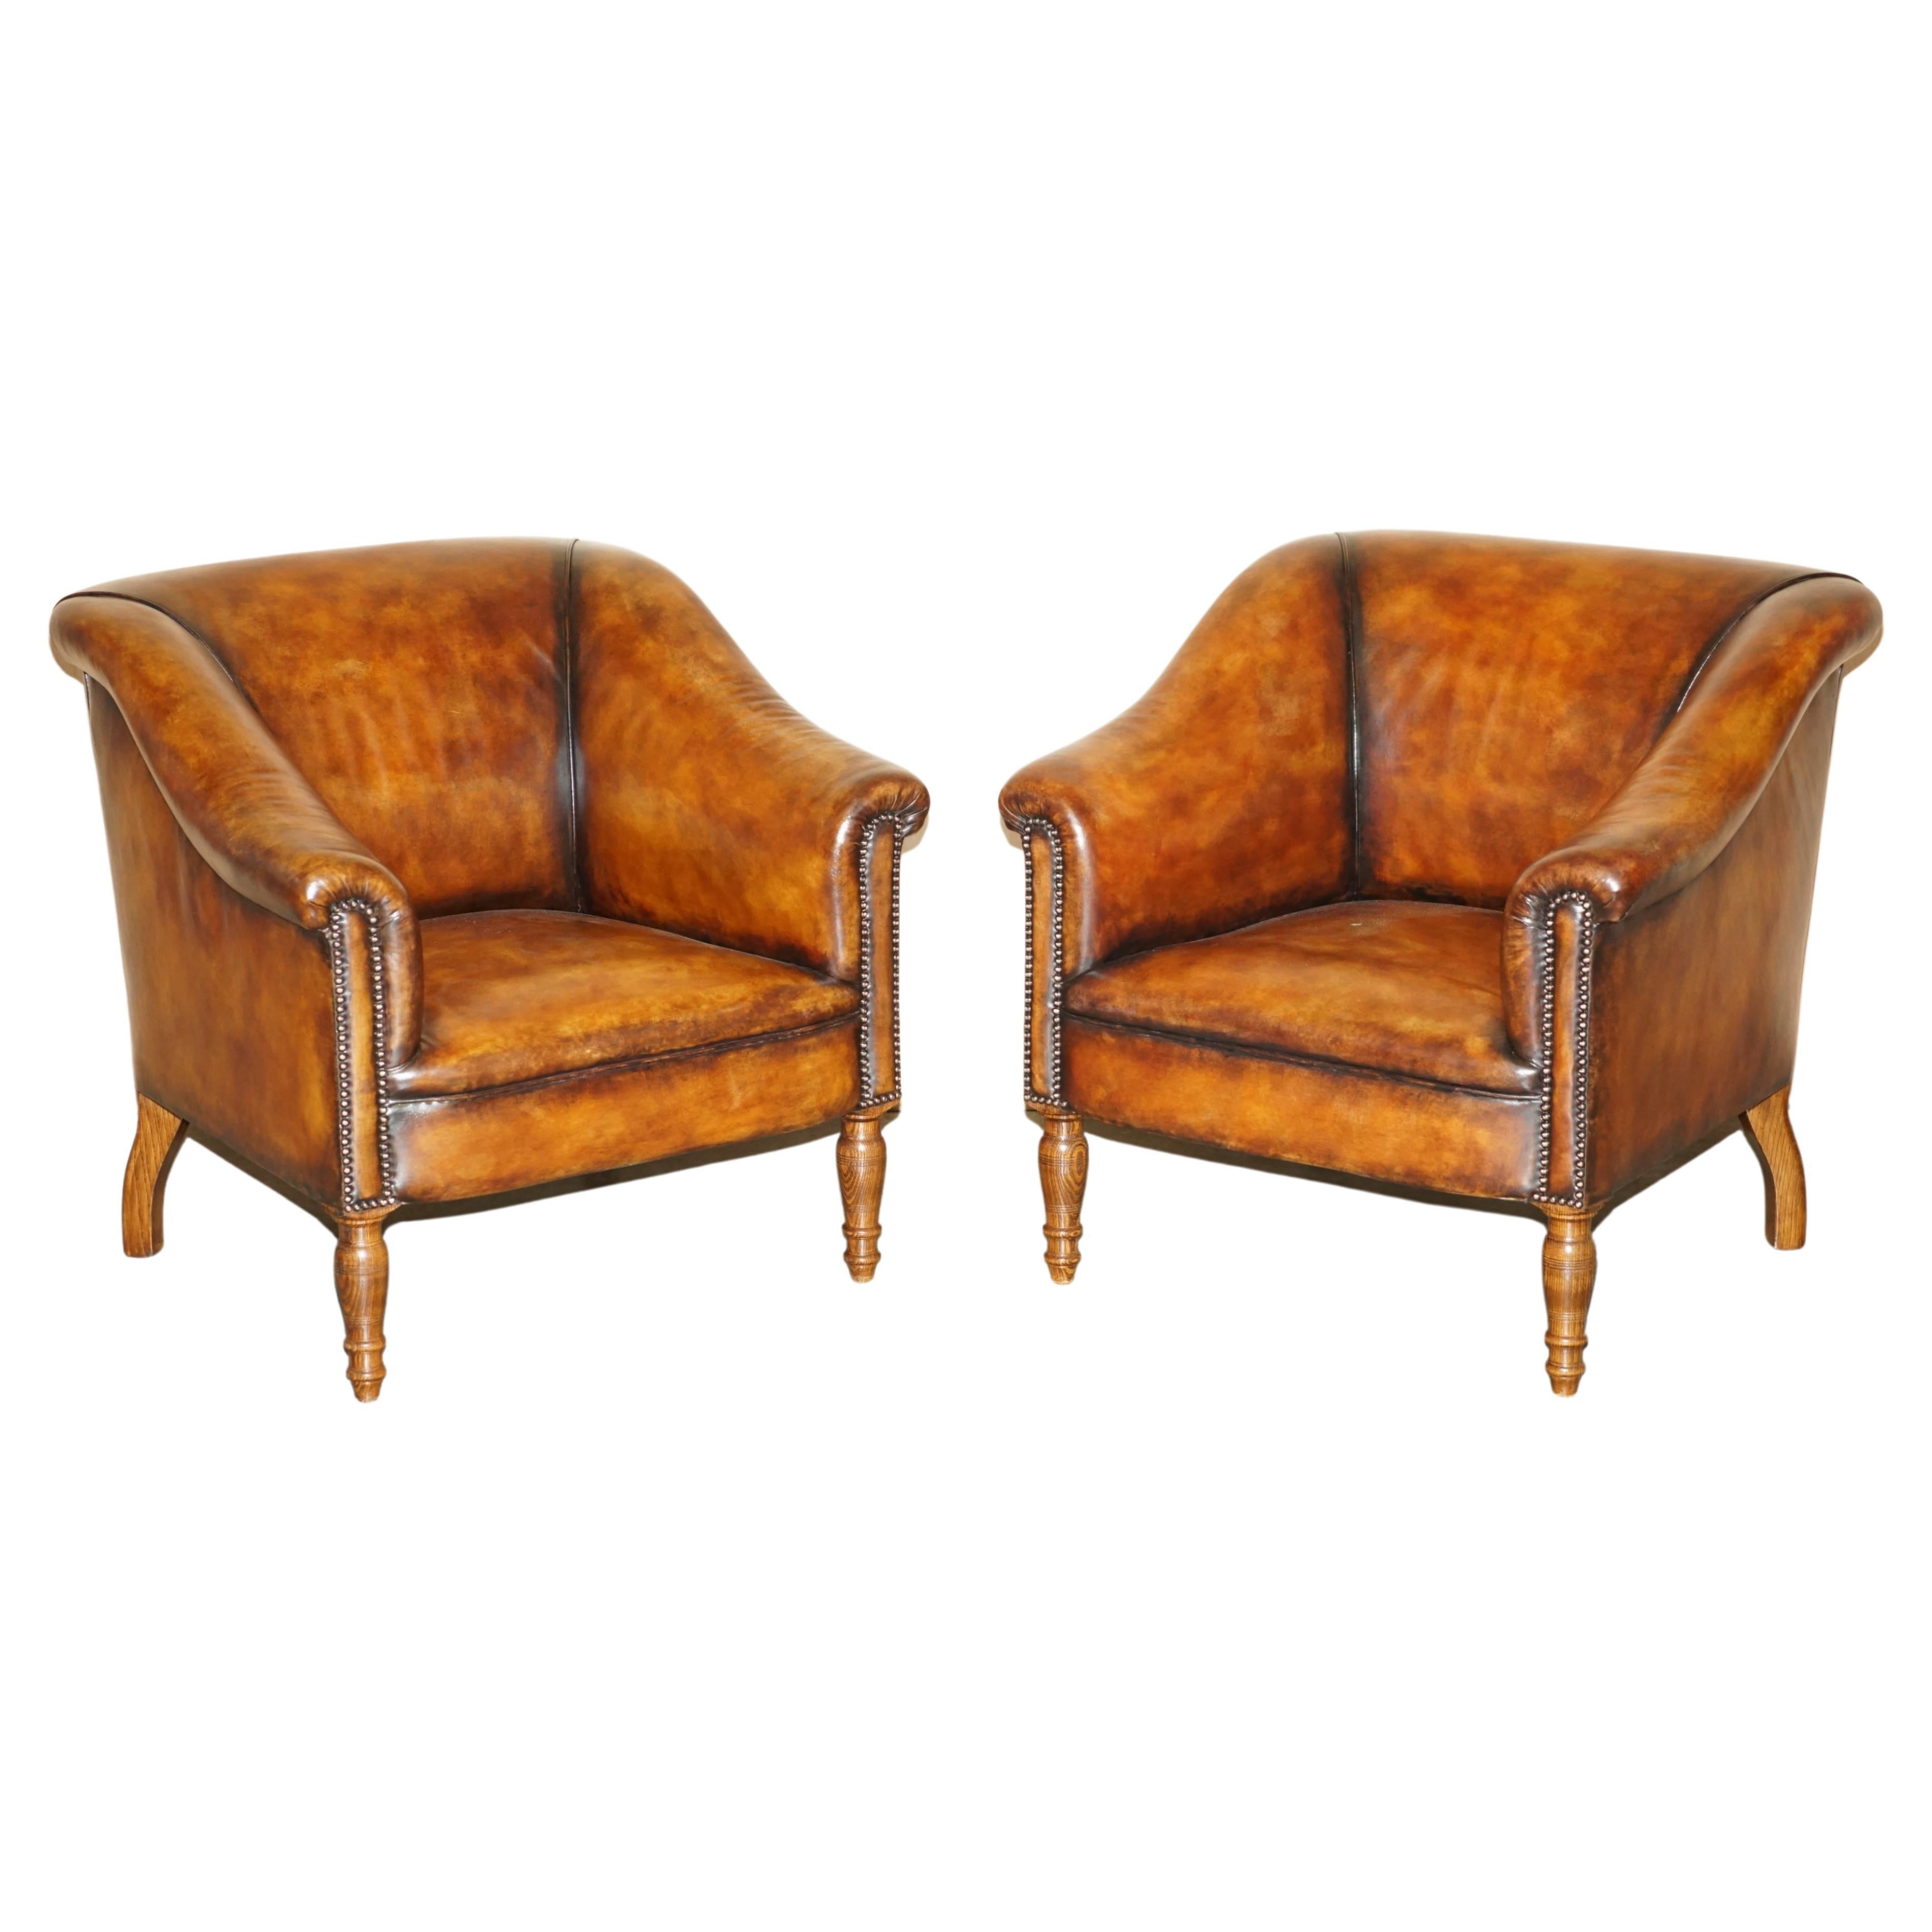 PAIR OF GEORGE SMITH SOMERVILLE RESTORED BROWN LEATHER ARMCHAiRS For Sale